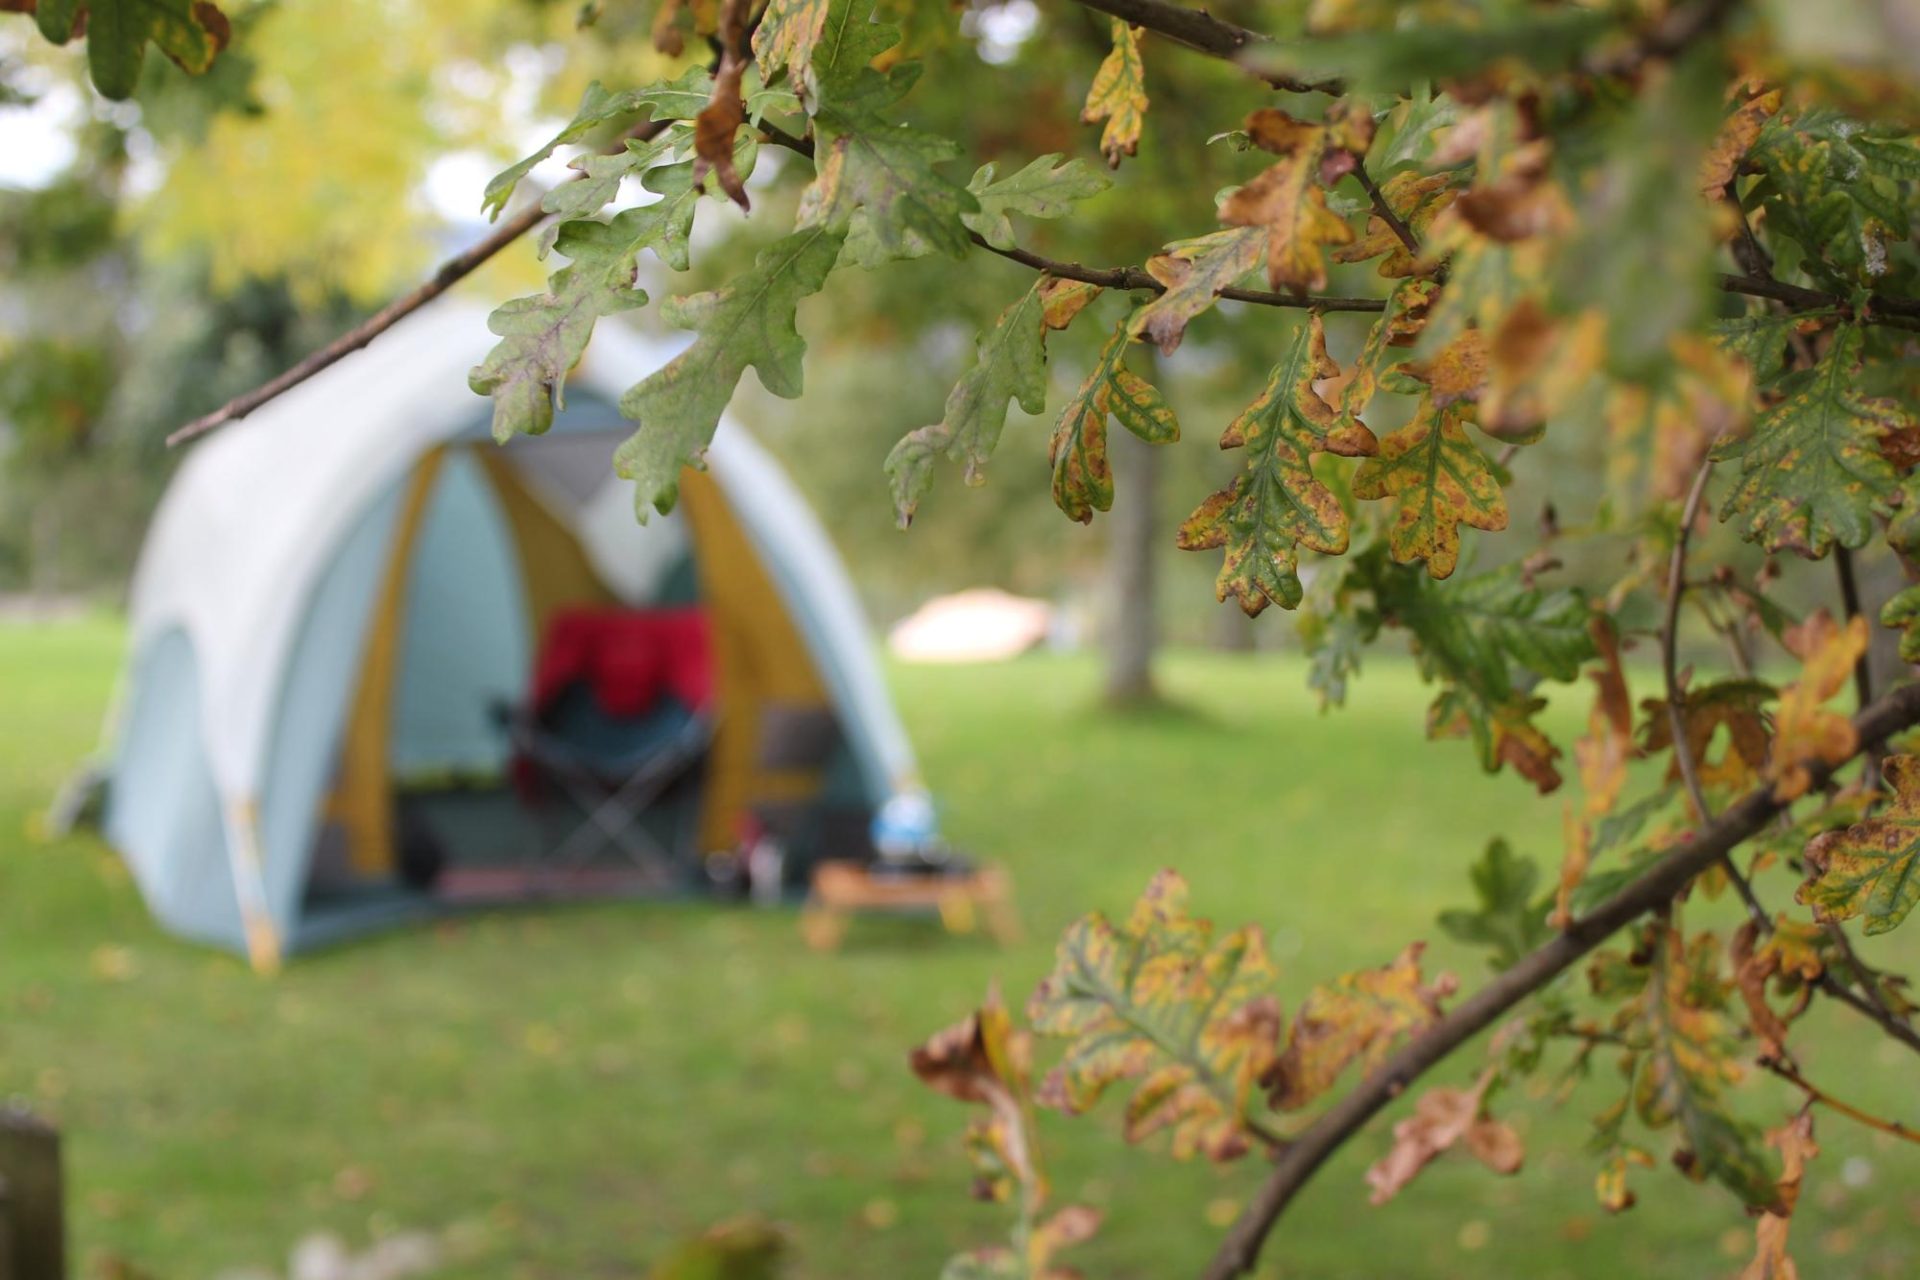 Camping, autumn, outdoor and leaves